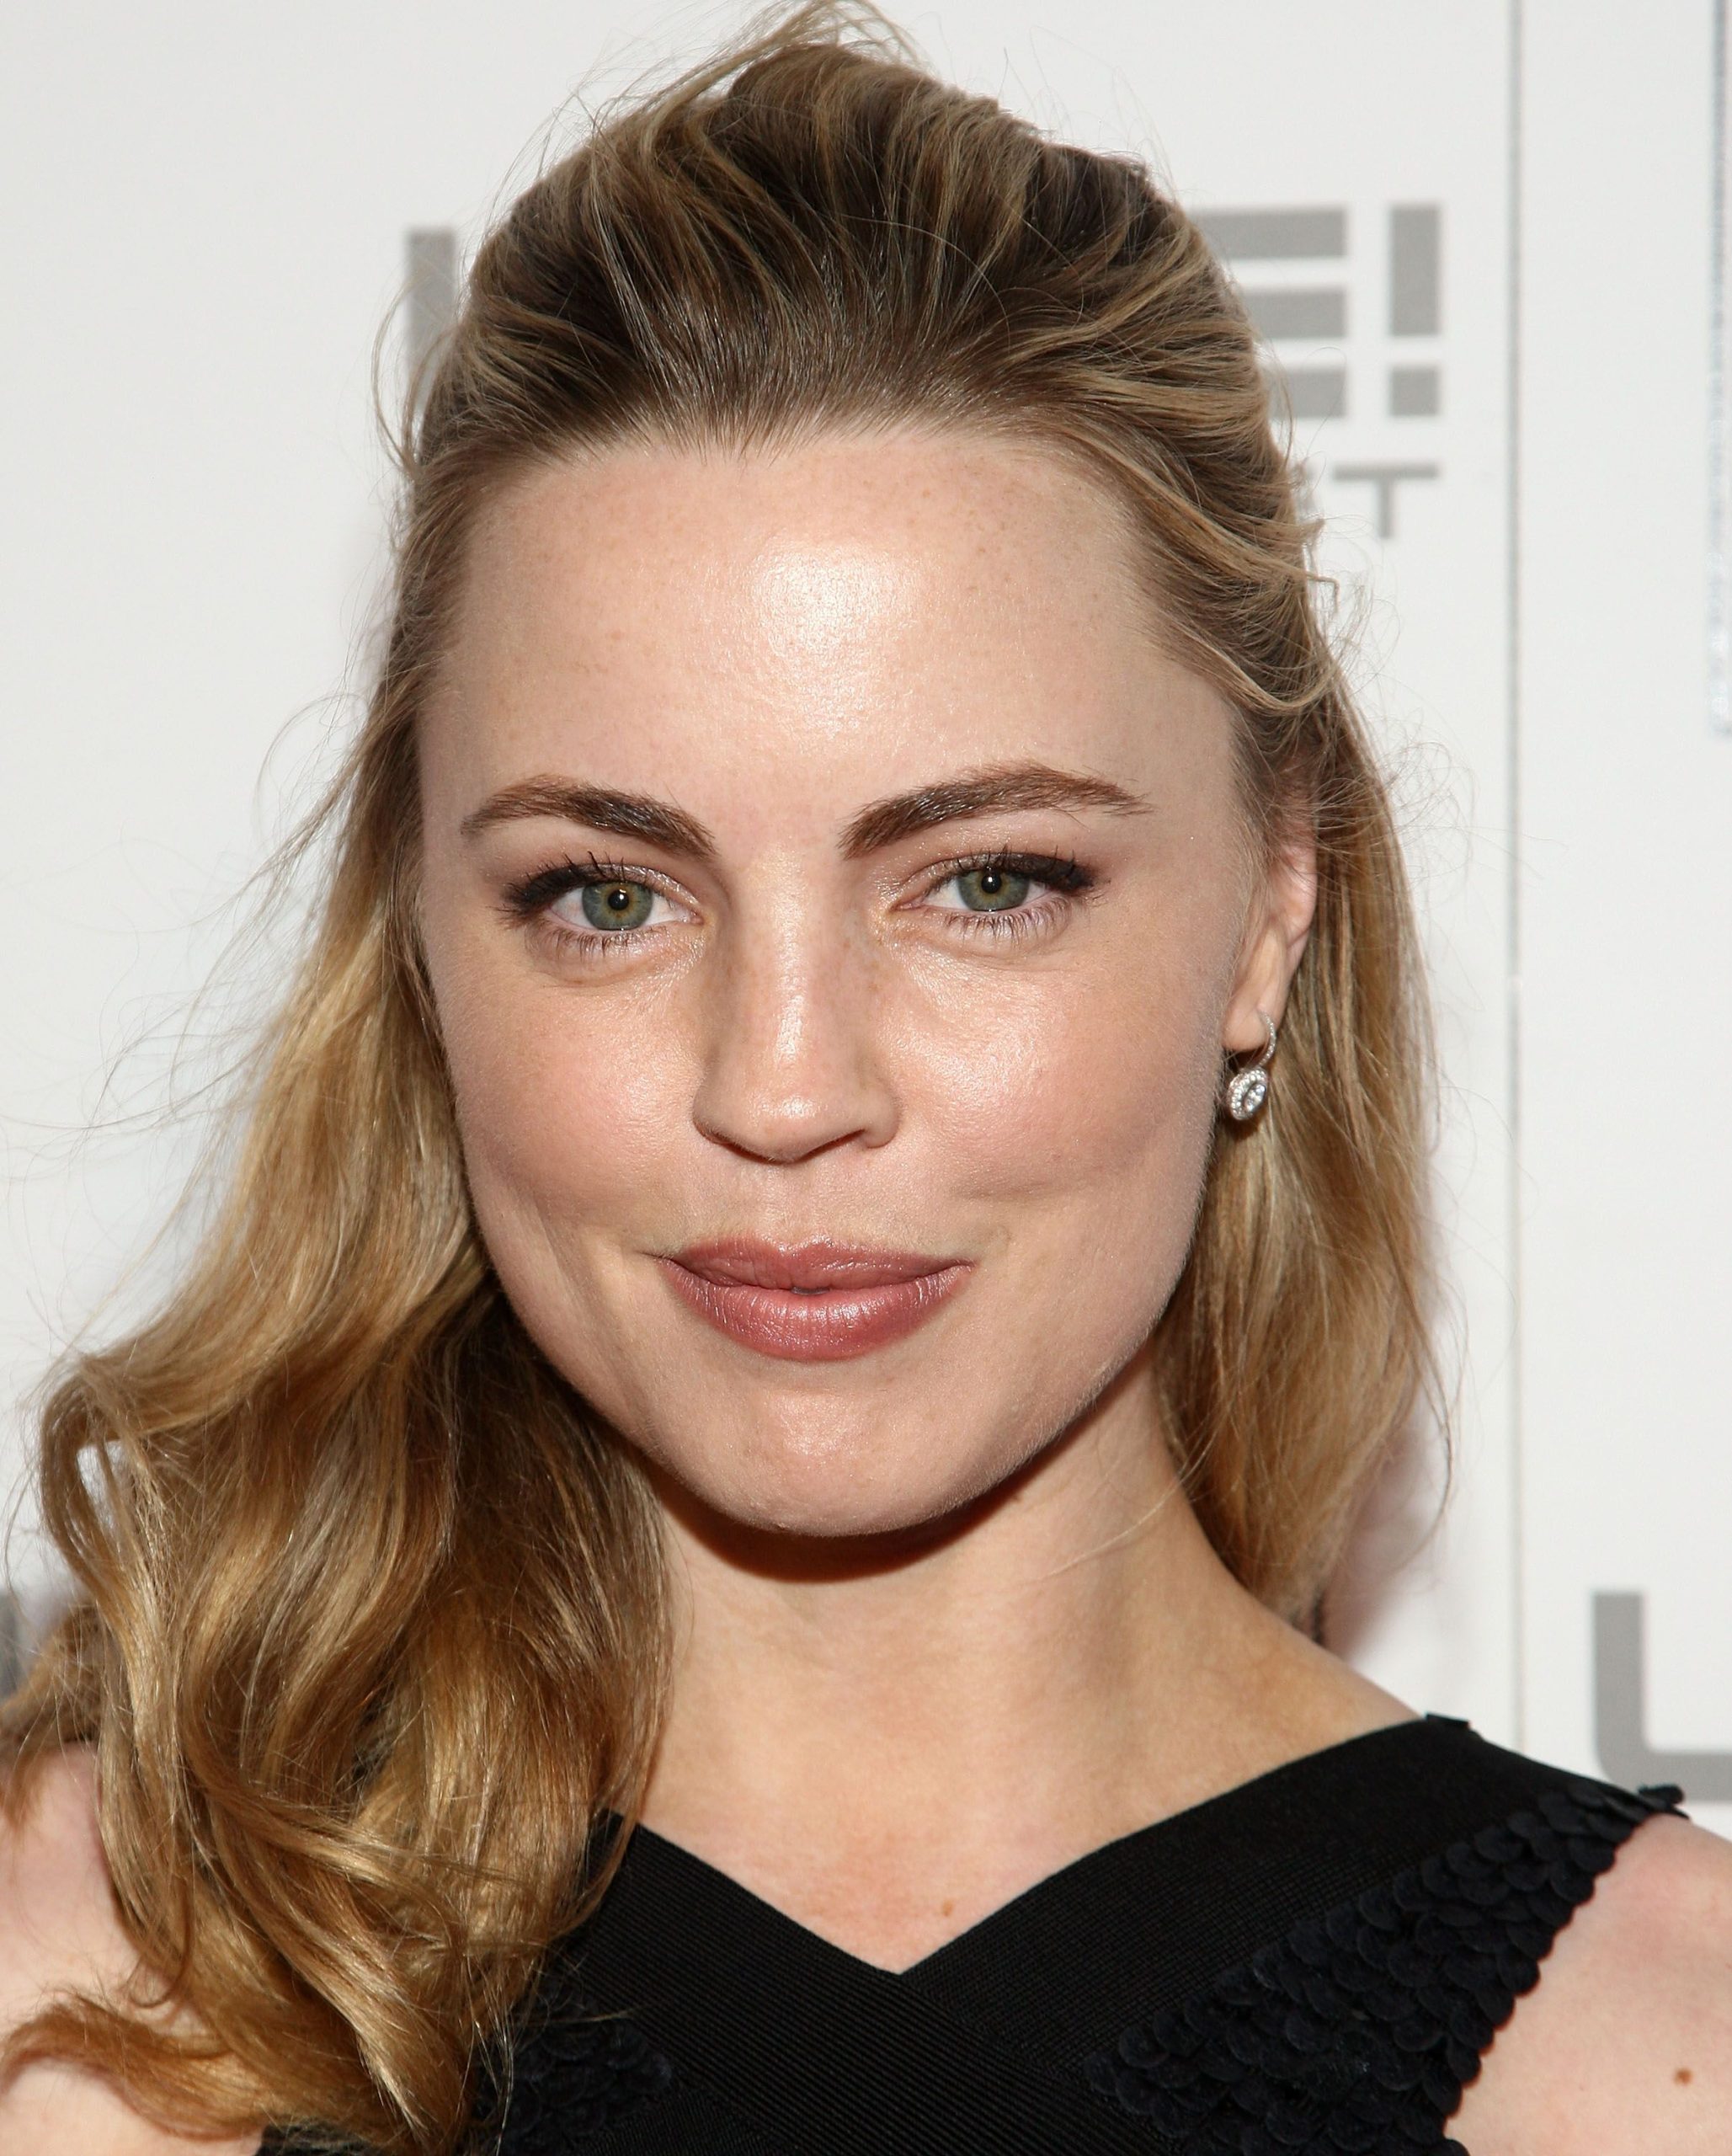 How Rich is Melissa George?